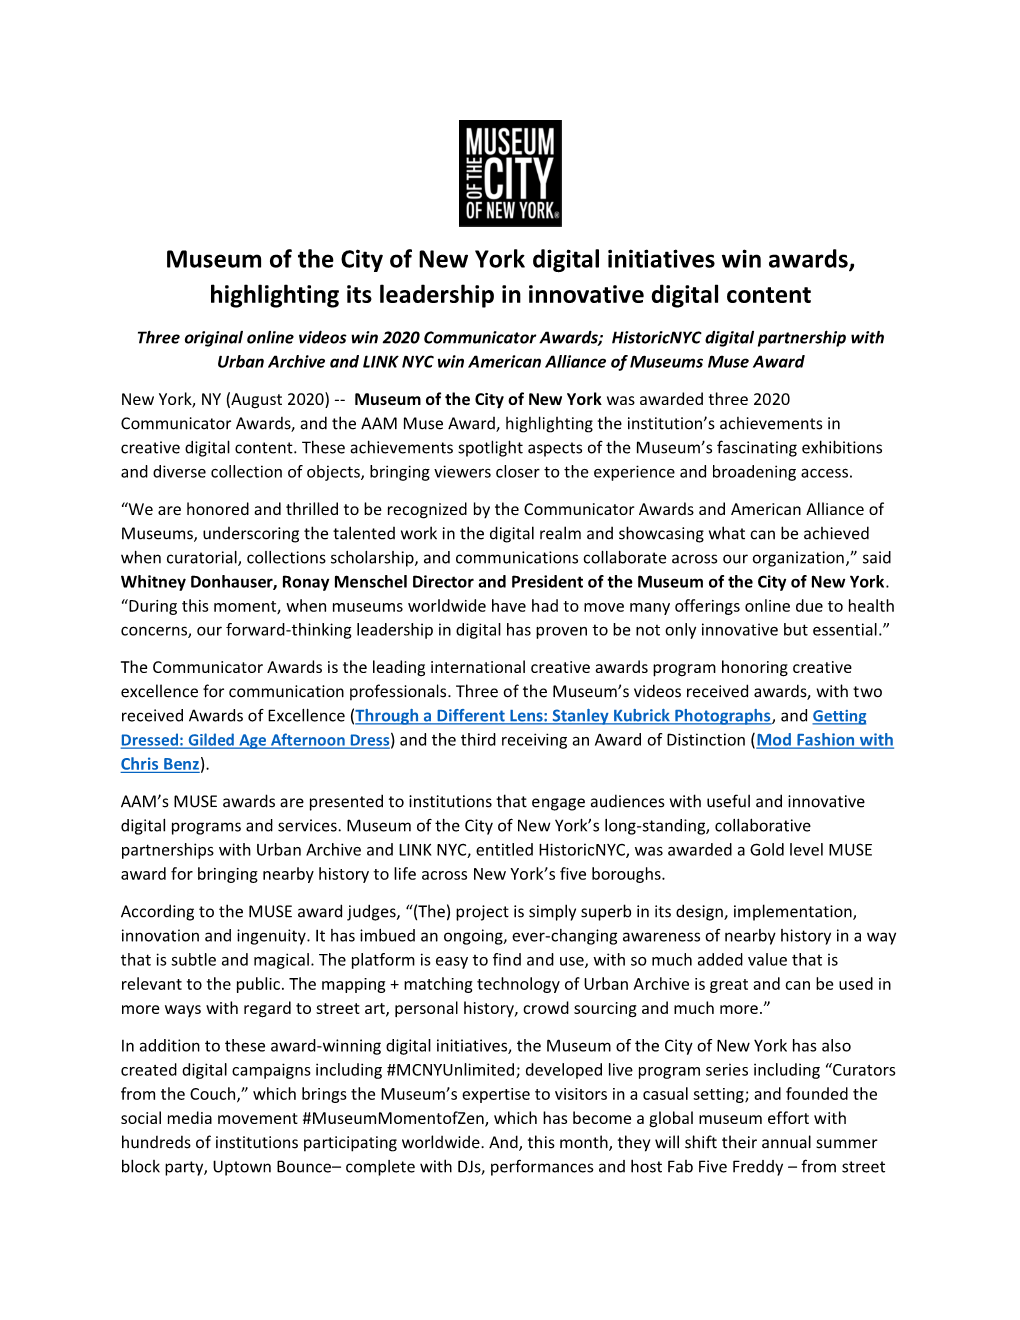 Museum of the City of New York Digital Initiatives Win Awards, Highlighting Its Leadership in Innovative Digital Content